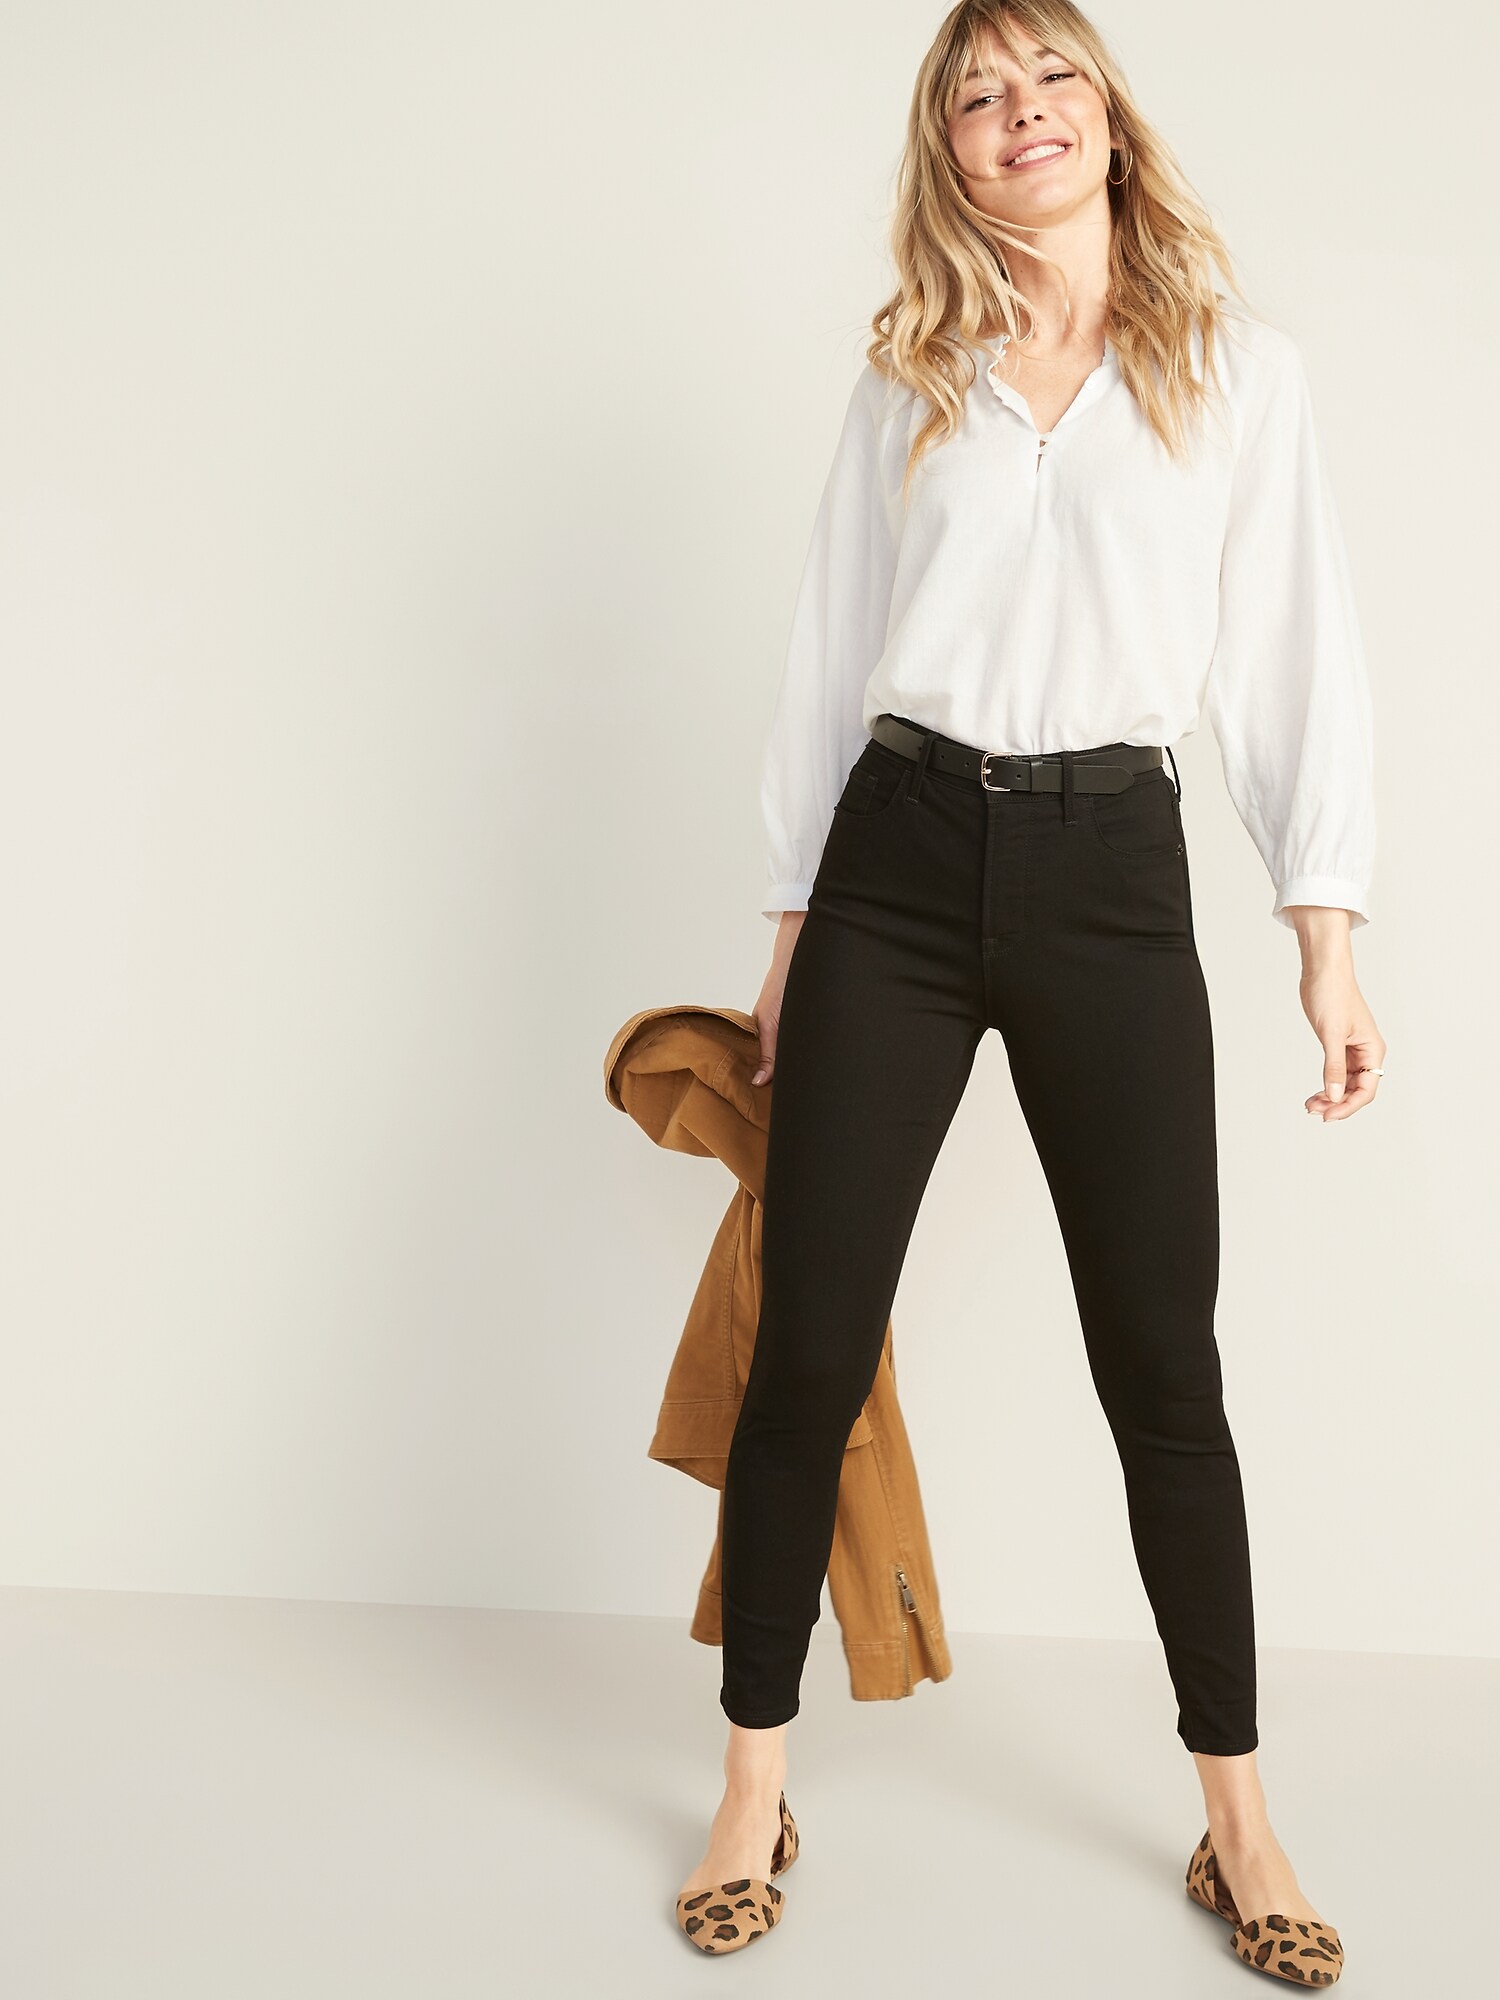 high waisted black jeans old navy